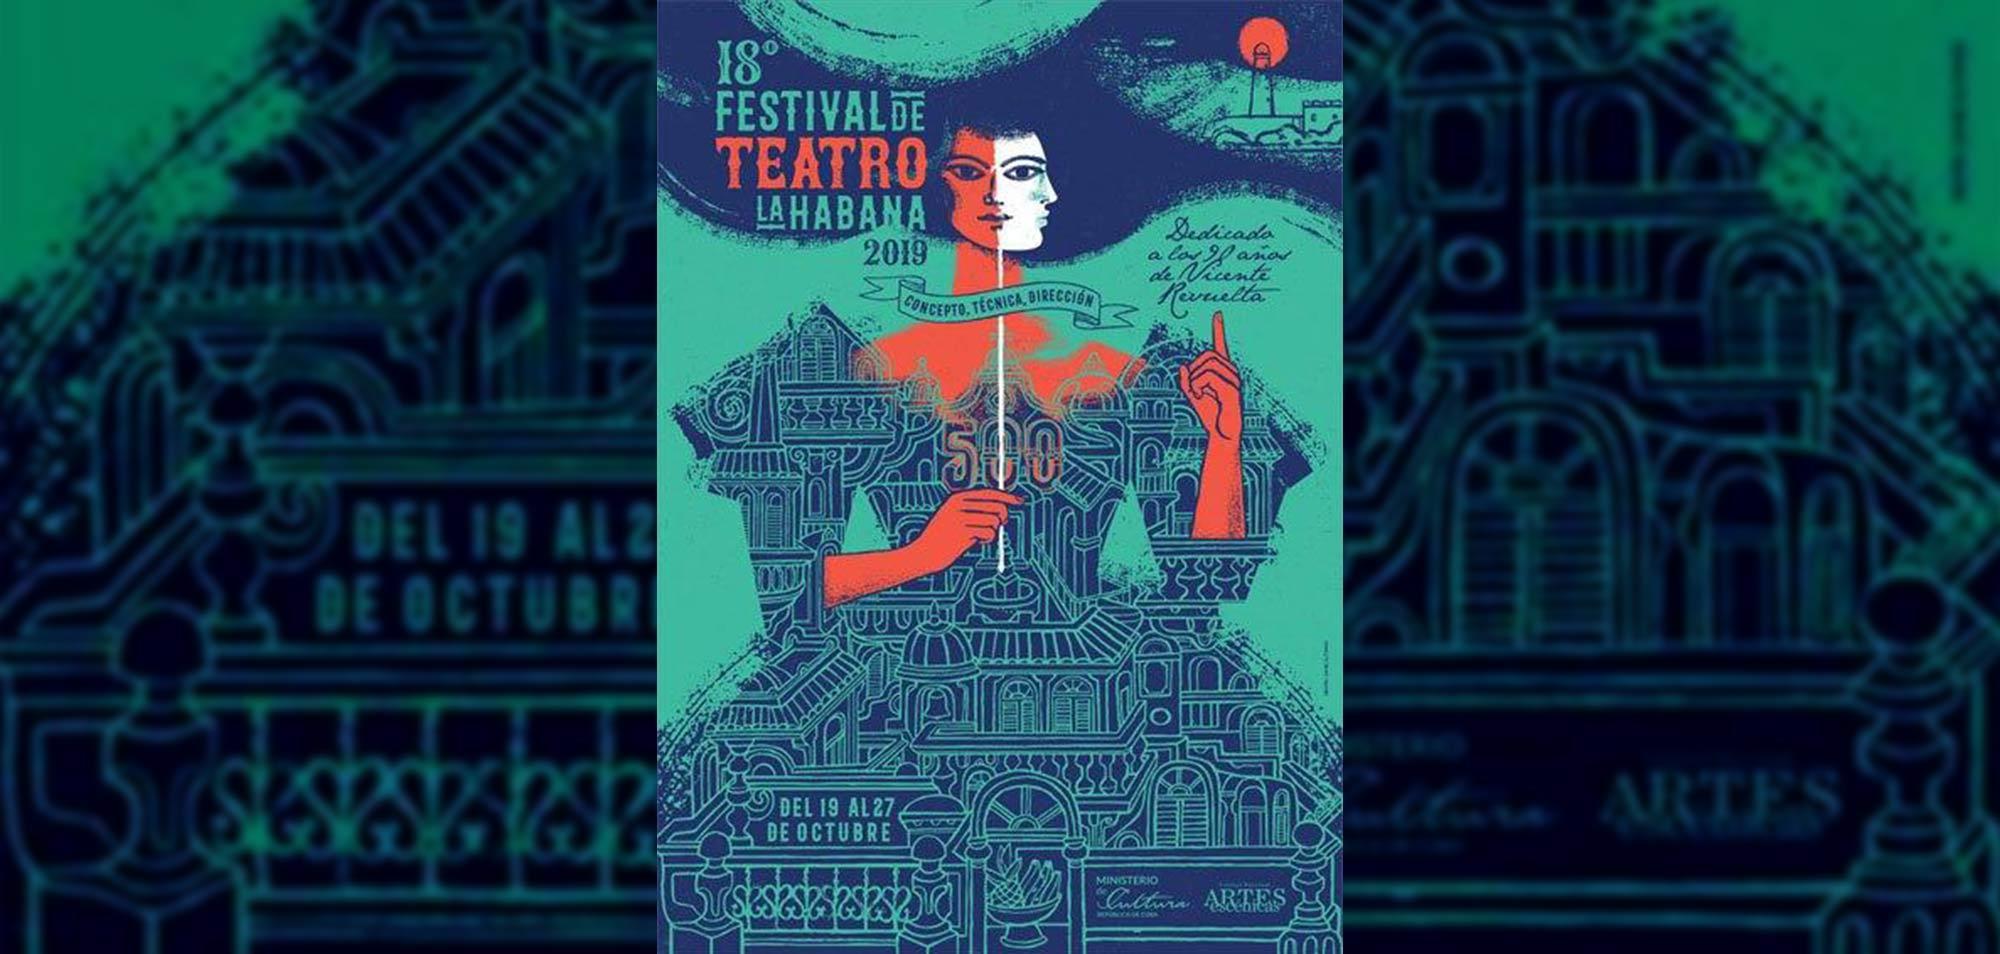 Havana Theater Festival on Stage this weekend